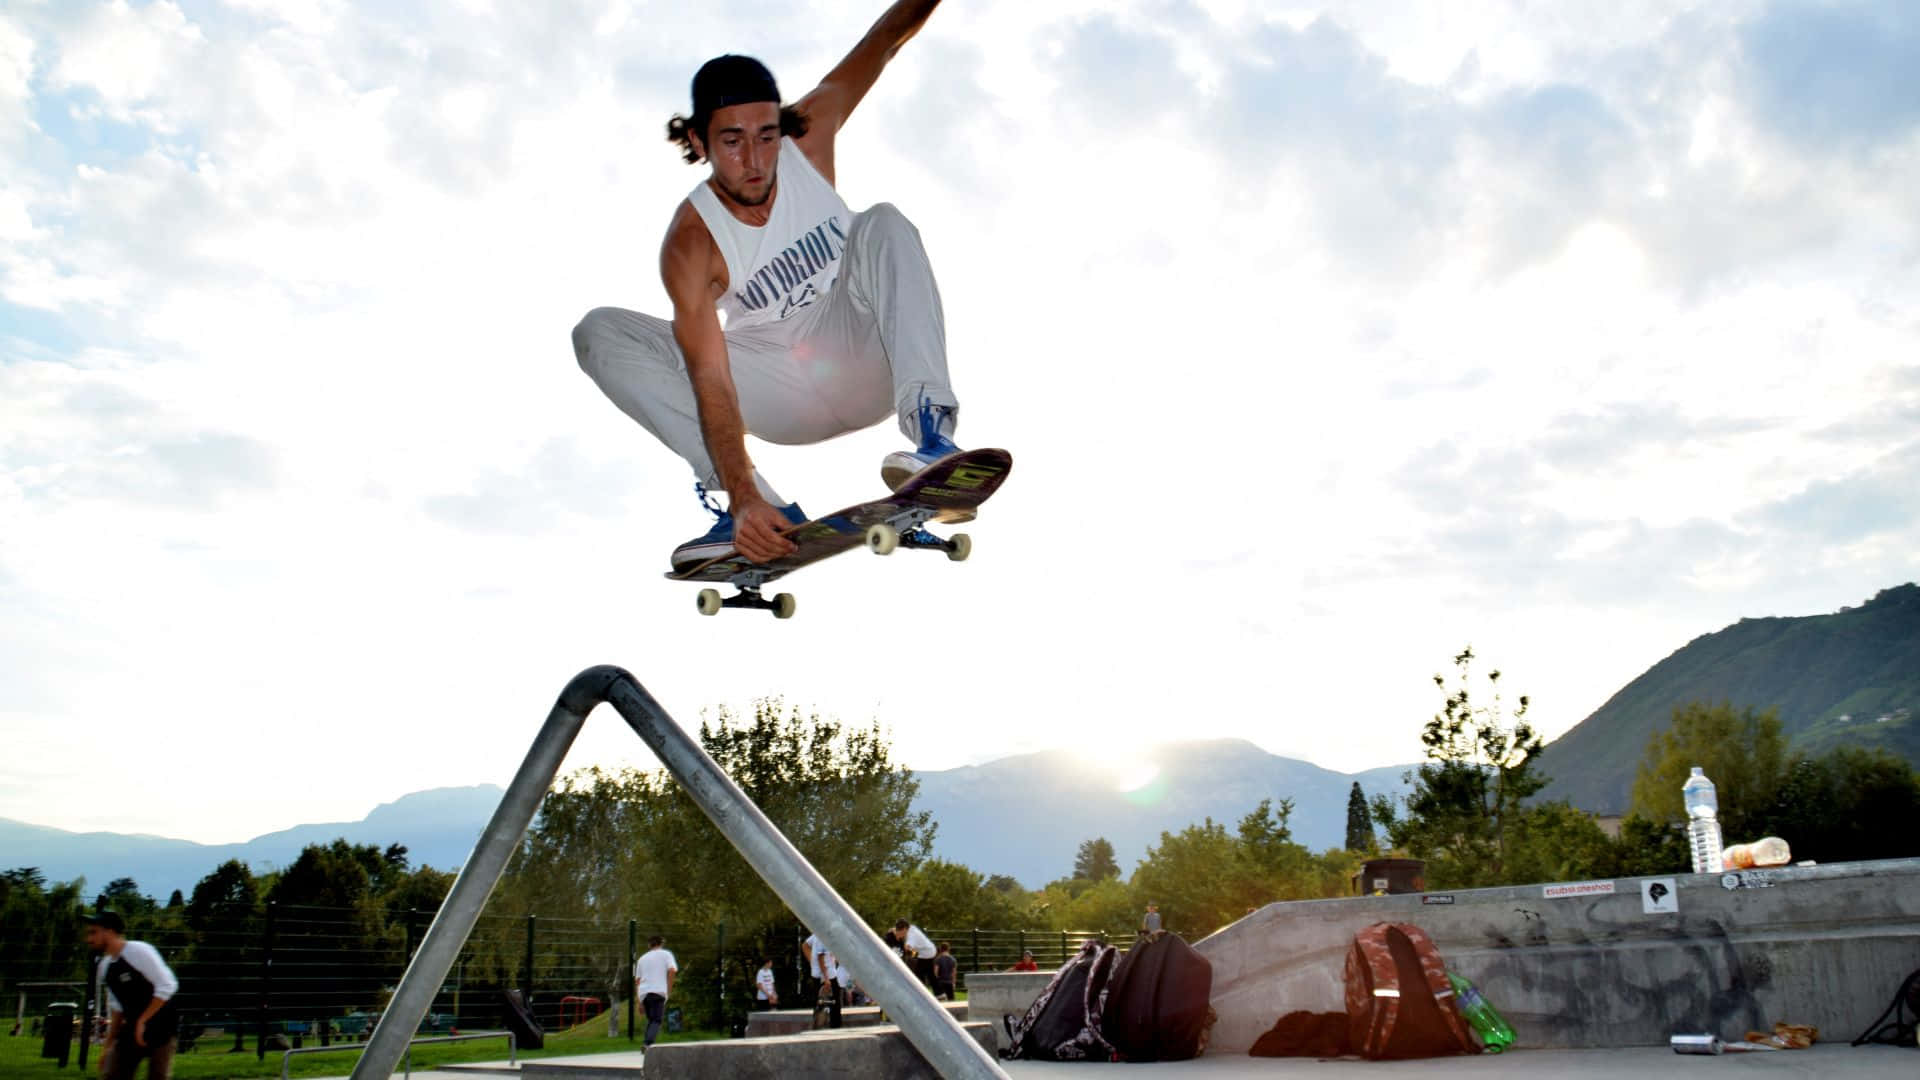 A skateboarder performing a jump in a skate park